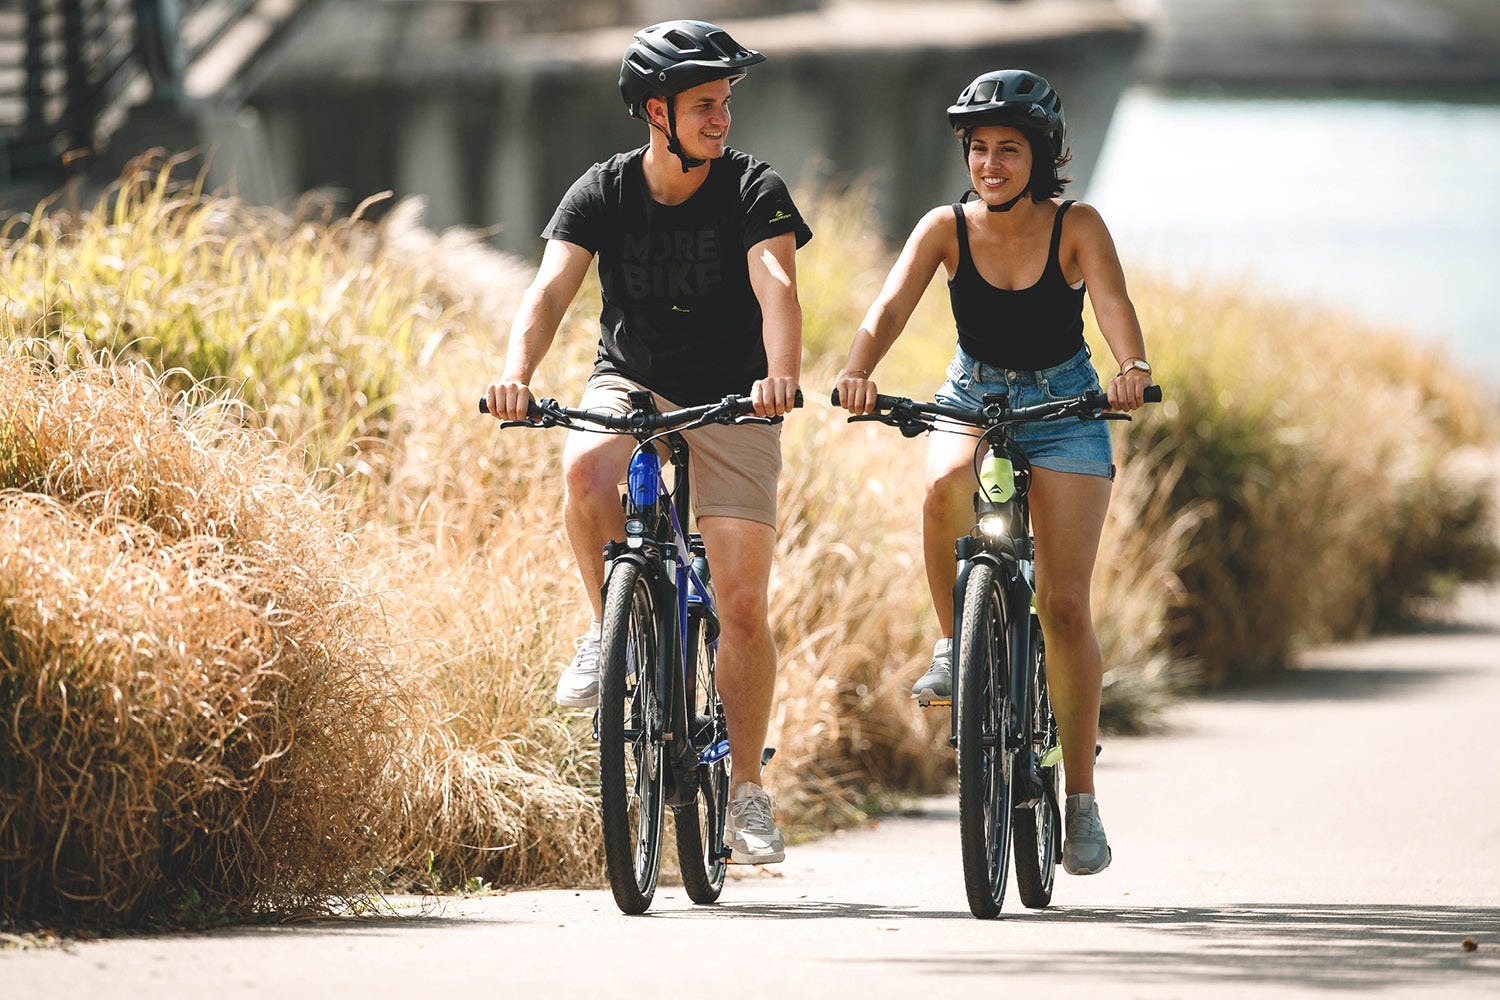 THINKING ABOUT AN E-BIKE? YOUR QUESTIONS ANSWERED BY OUR EXPERTS